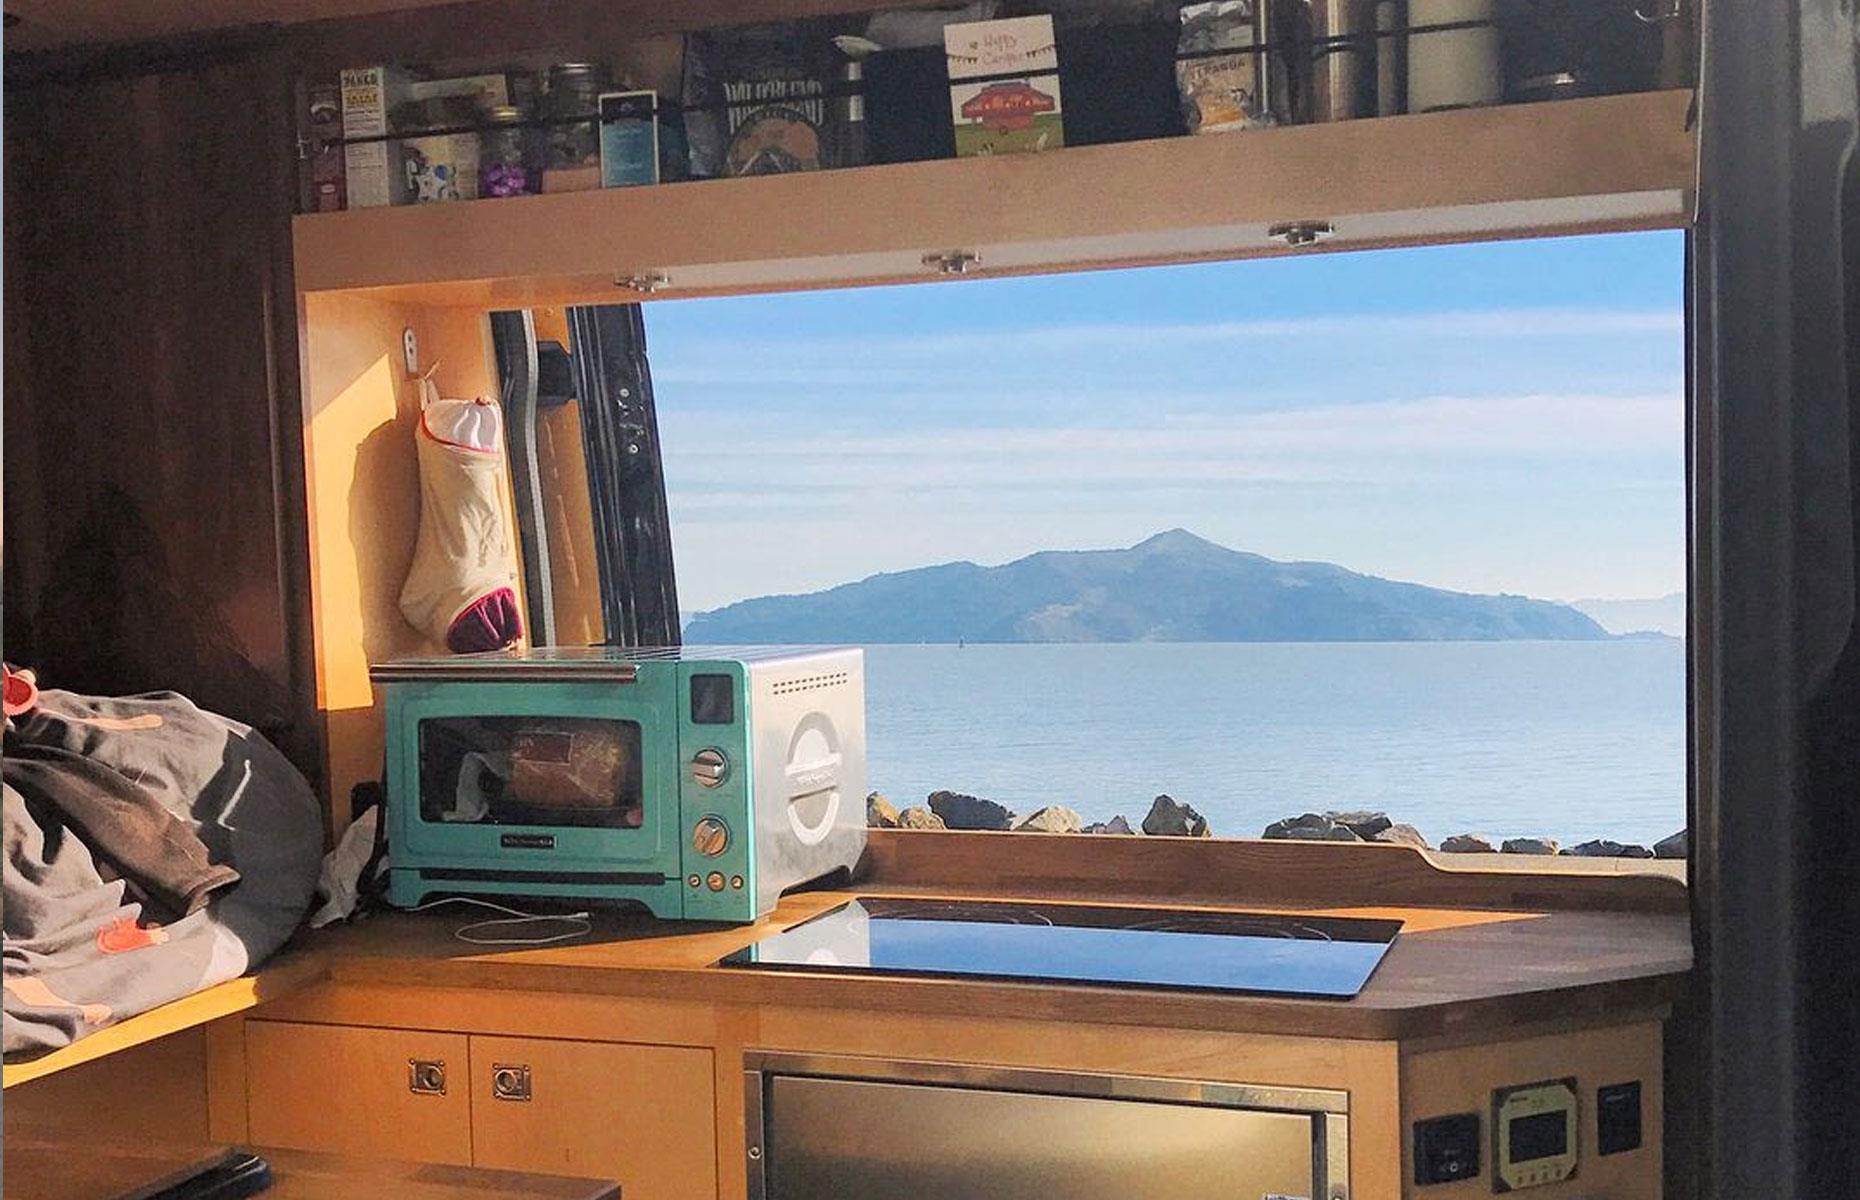 <p>Because it's their permanent home, Joe and Emilie have got all the essentials, plus a few luxuries. There's a full kitchen, with maple and walnut walls and cabinets for storage. Cooking with views like this would certainly make up for living in such close quarters. The campervan has also just been rejuvenated. "Now it looks as wonderful as the day we started back in 2016," says Joe. </p>